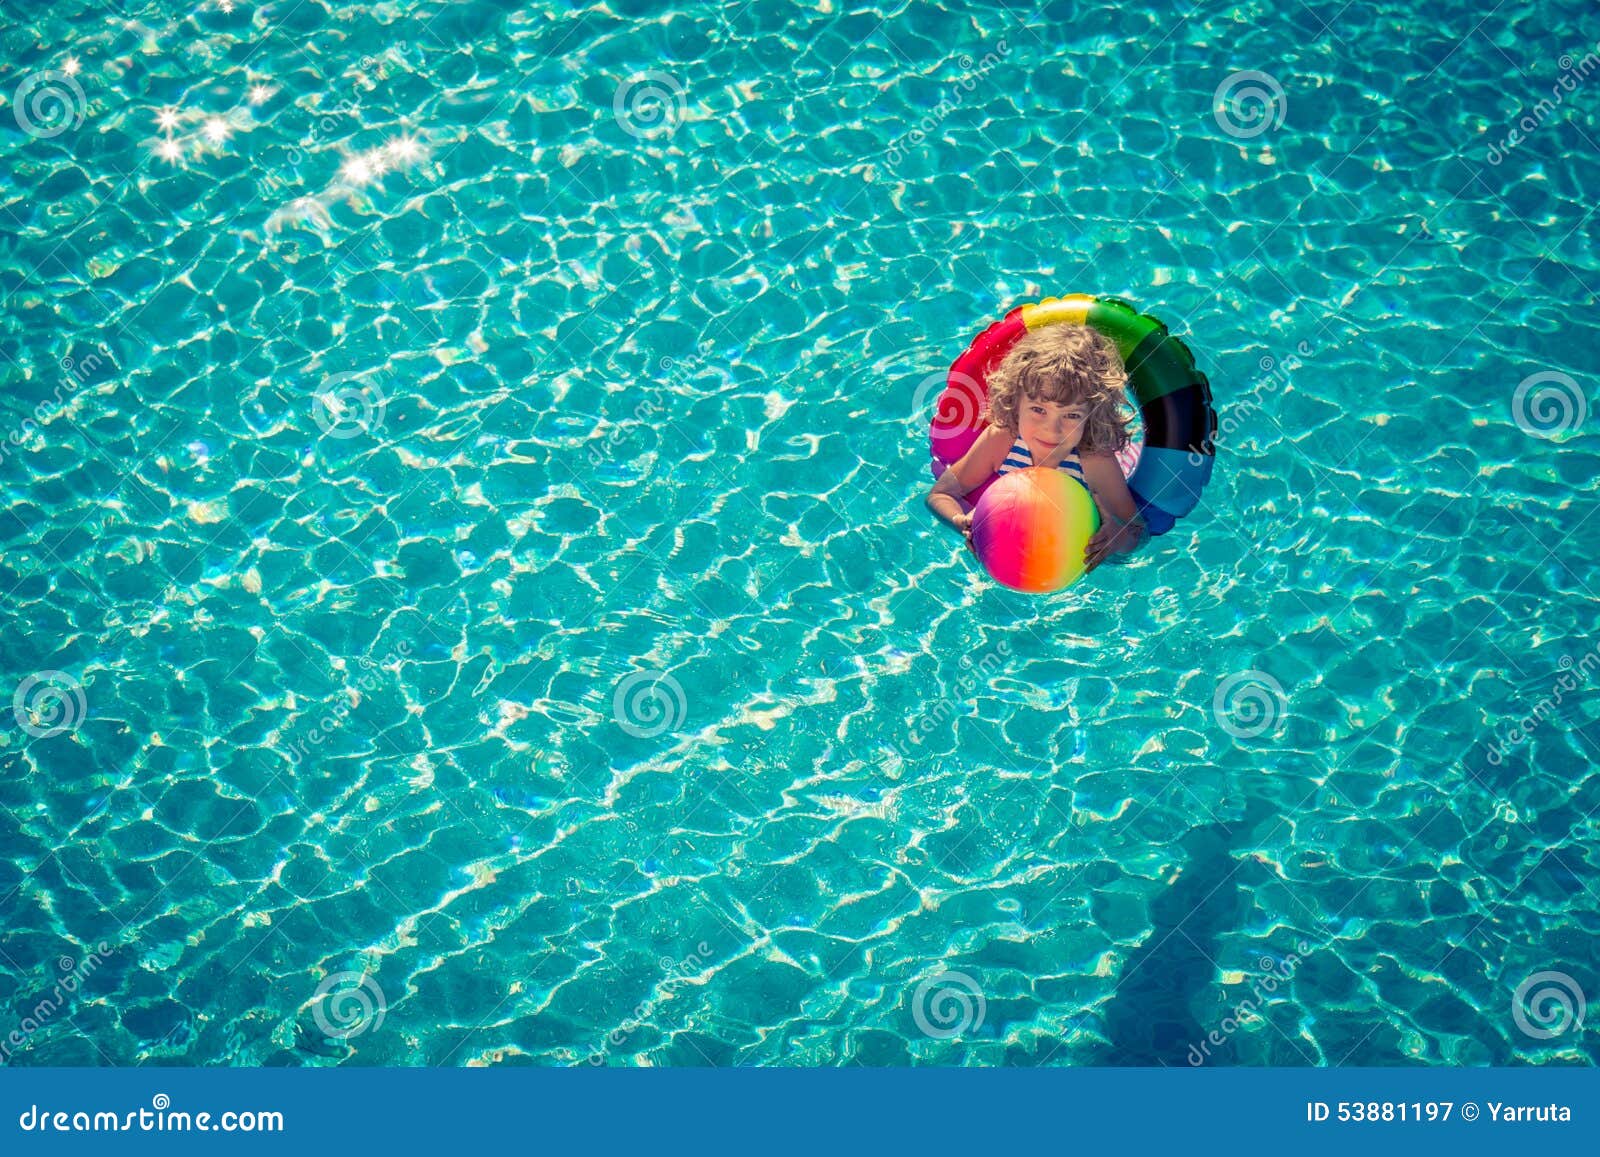 Happy Child Playing in Swimming Pool Stock Image - Image of baby ...